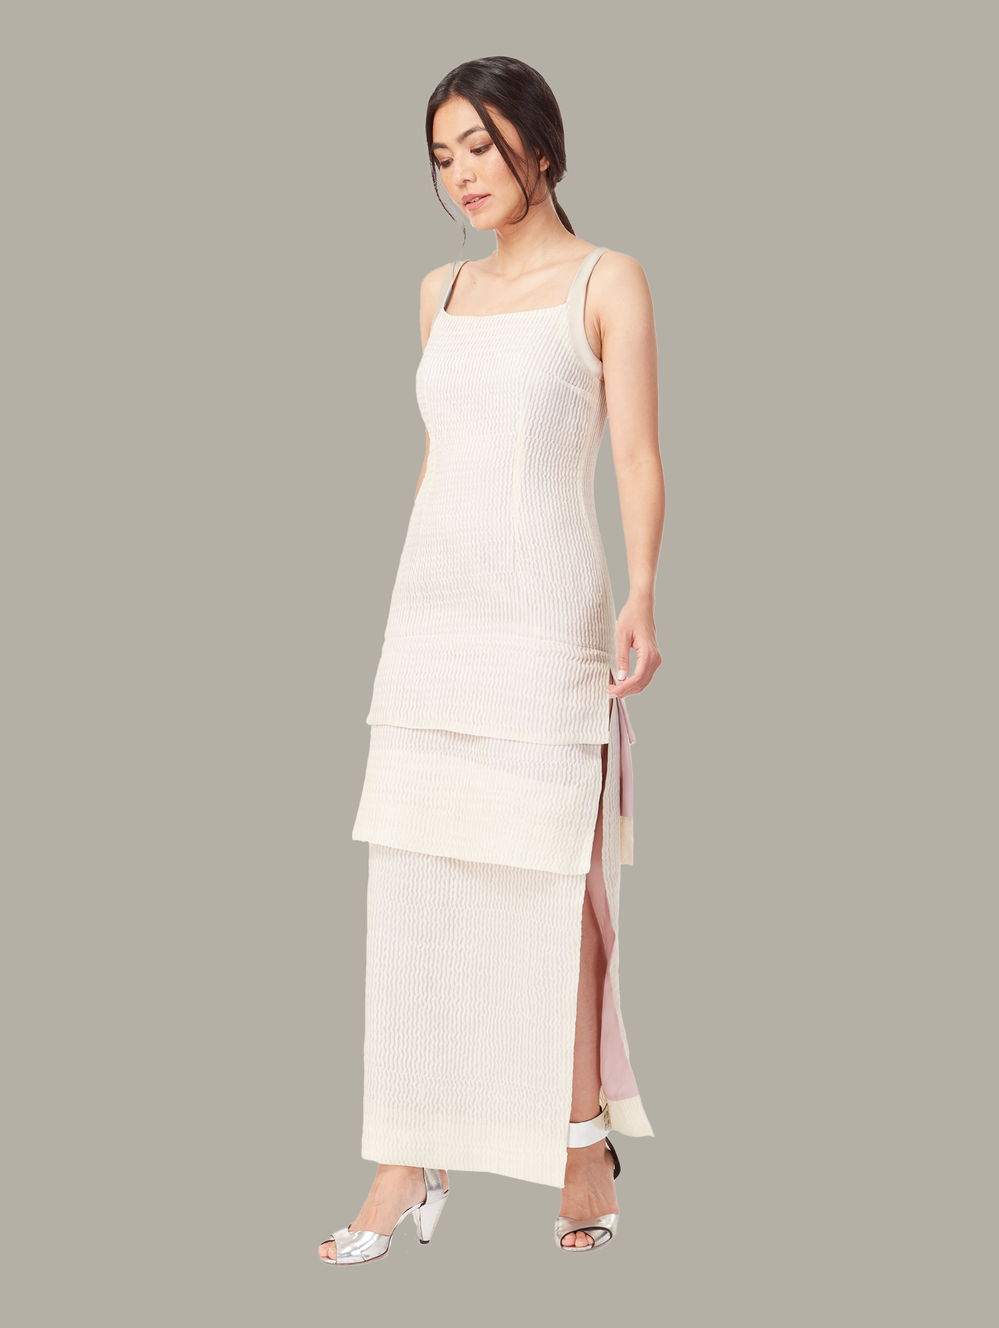 Front view of ERICA 3-tier cocktail dress in ivory, available from British sustainable fashion brand DEPLOY